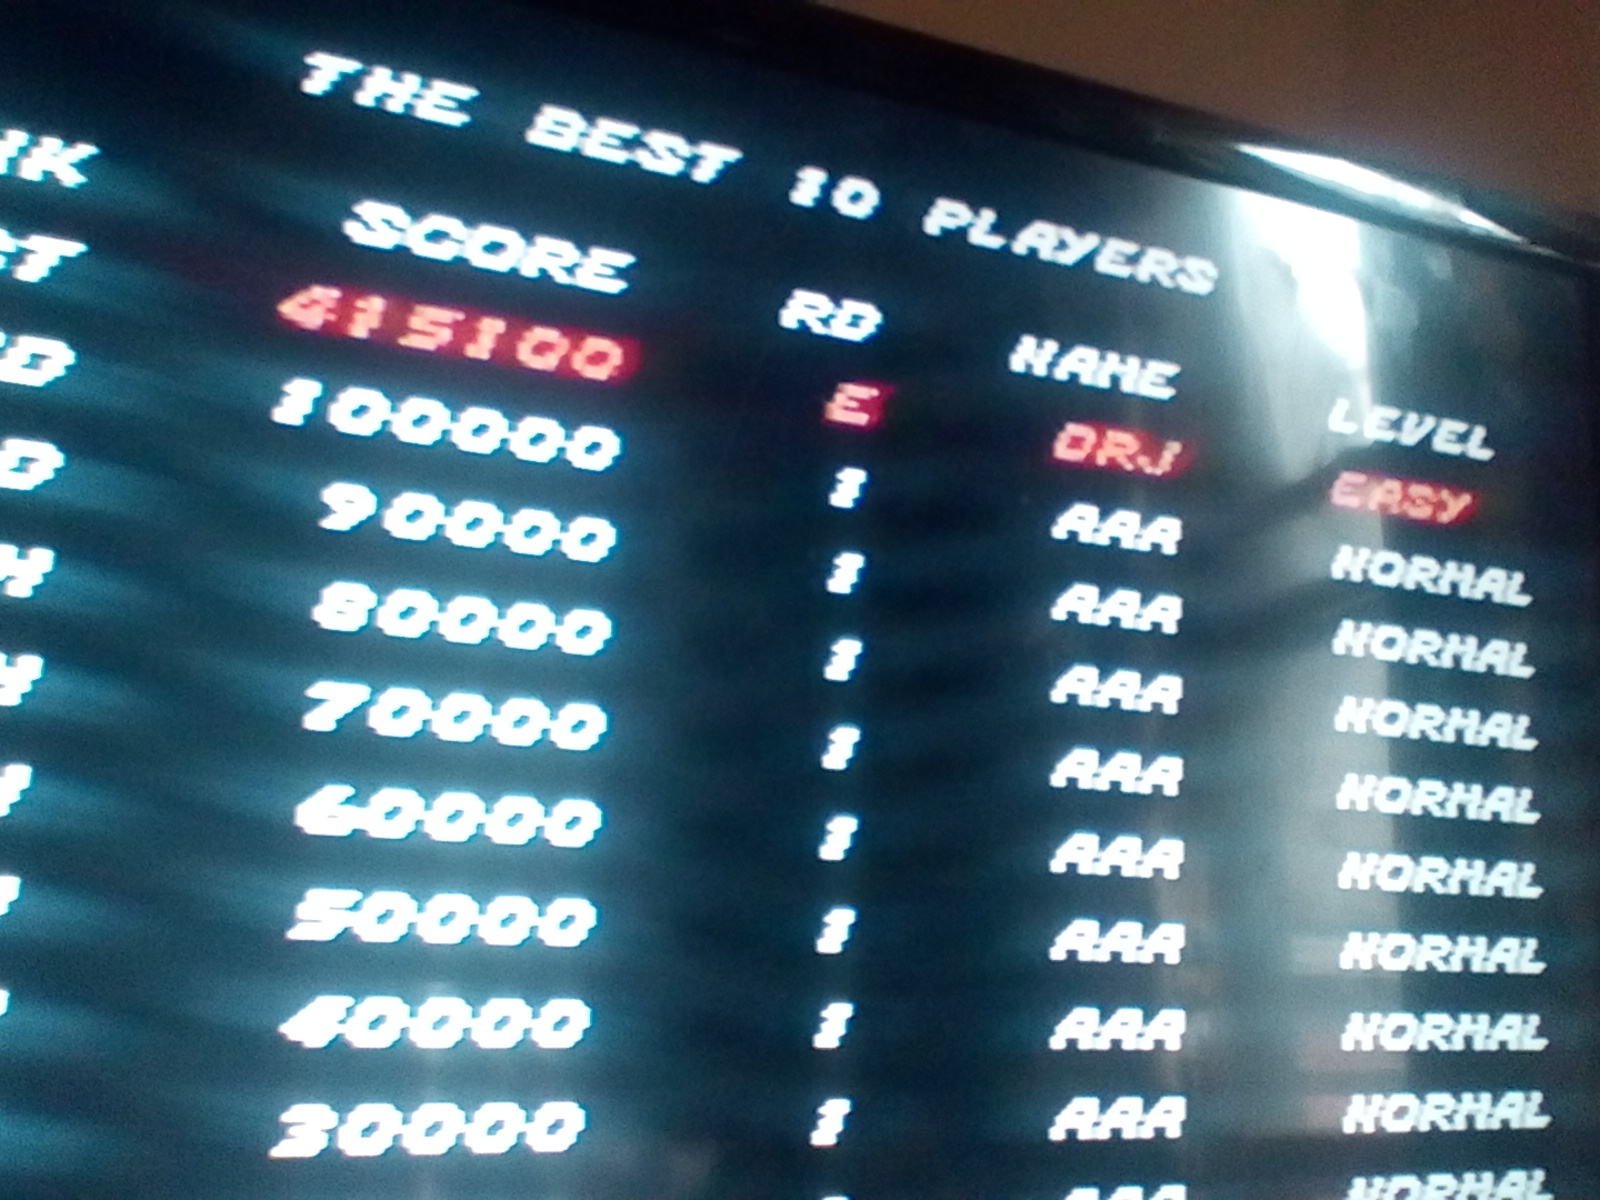 Streets of Rage 415,100 points